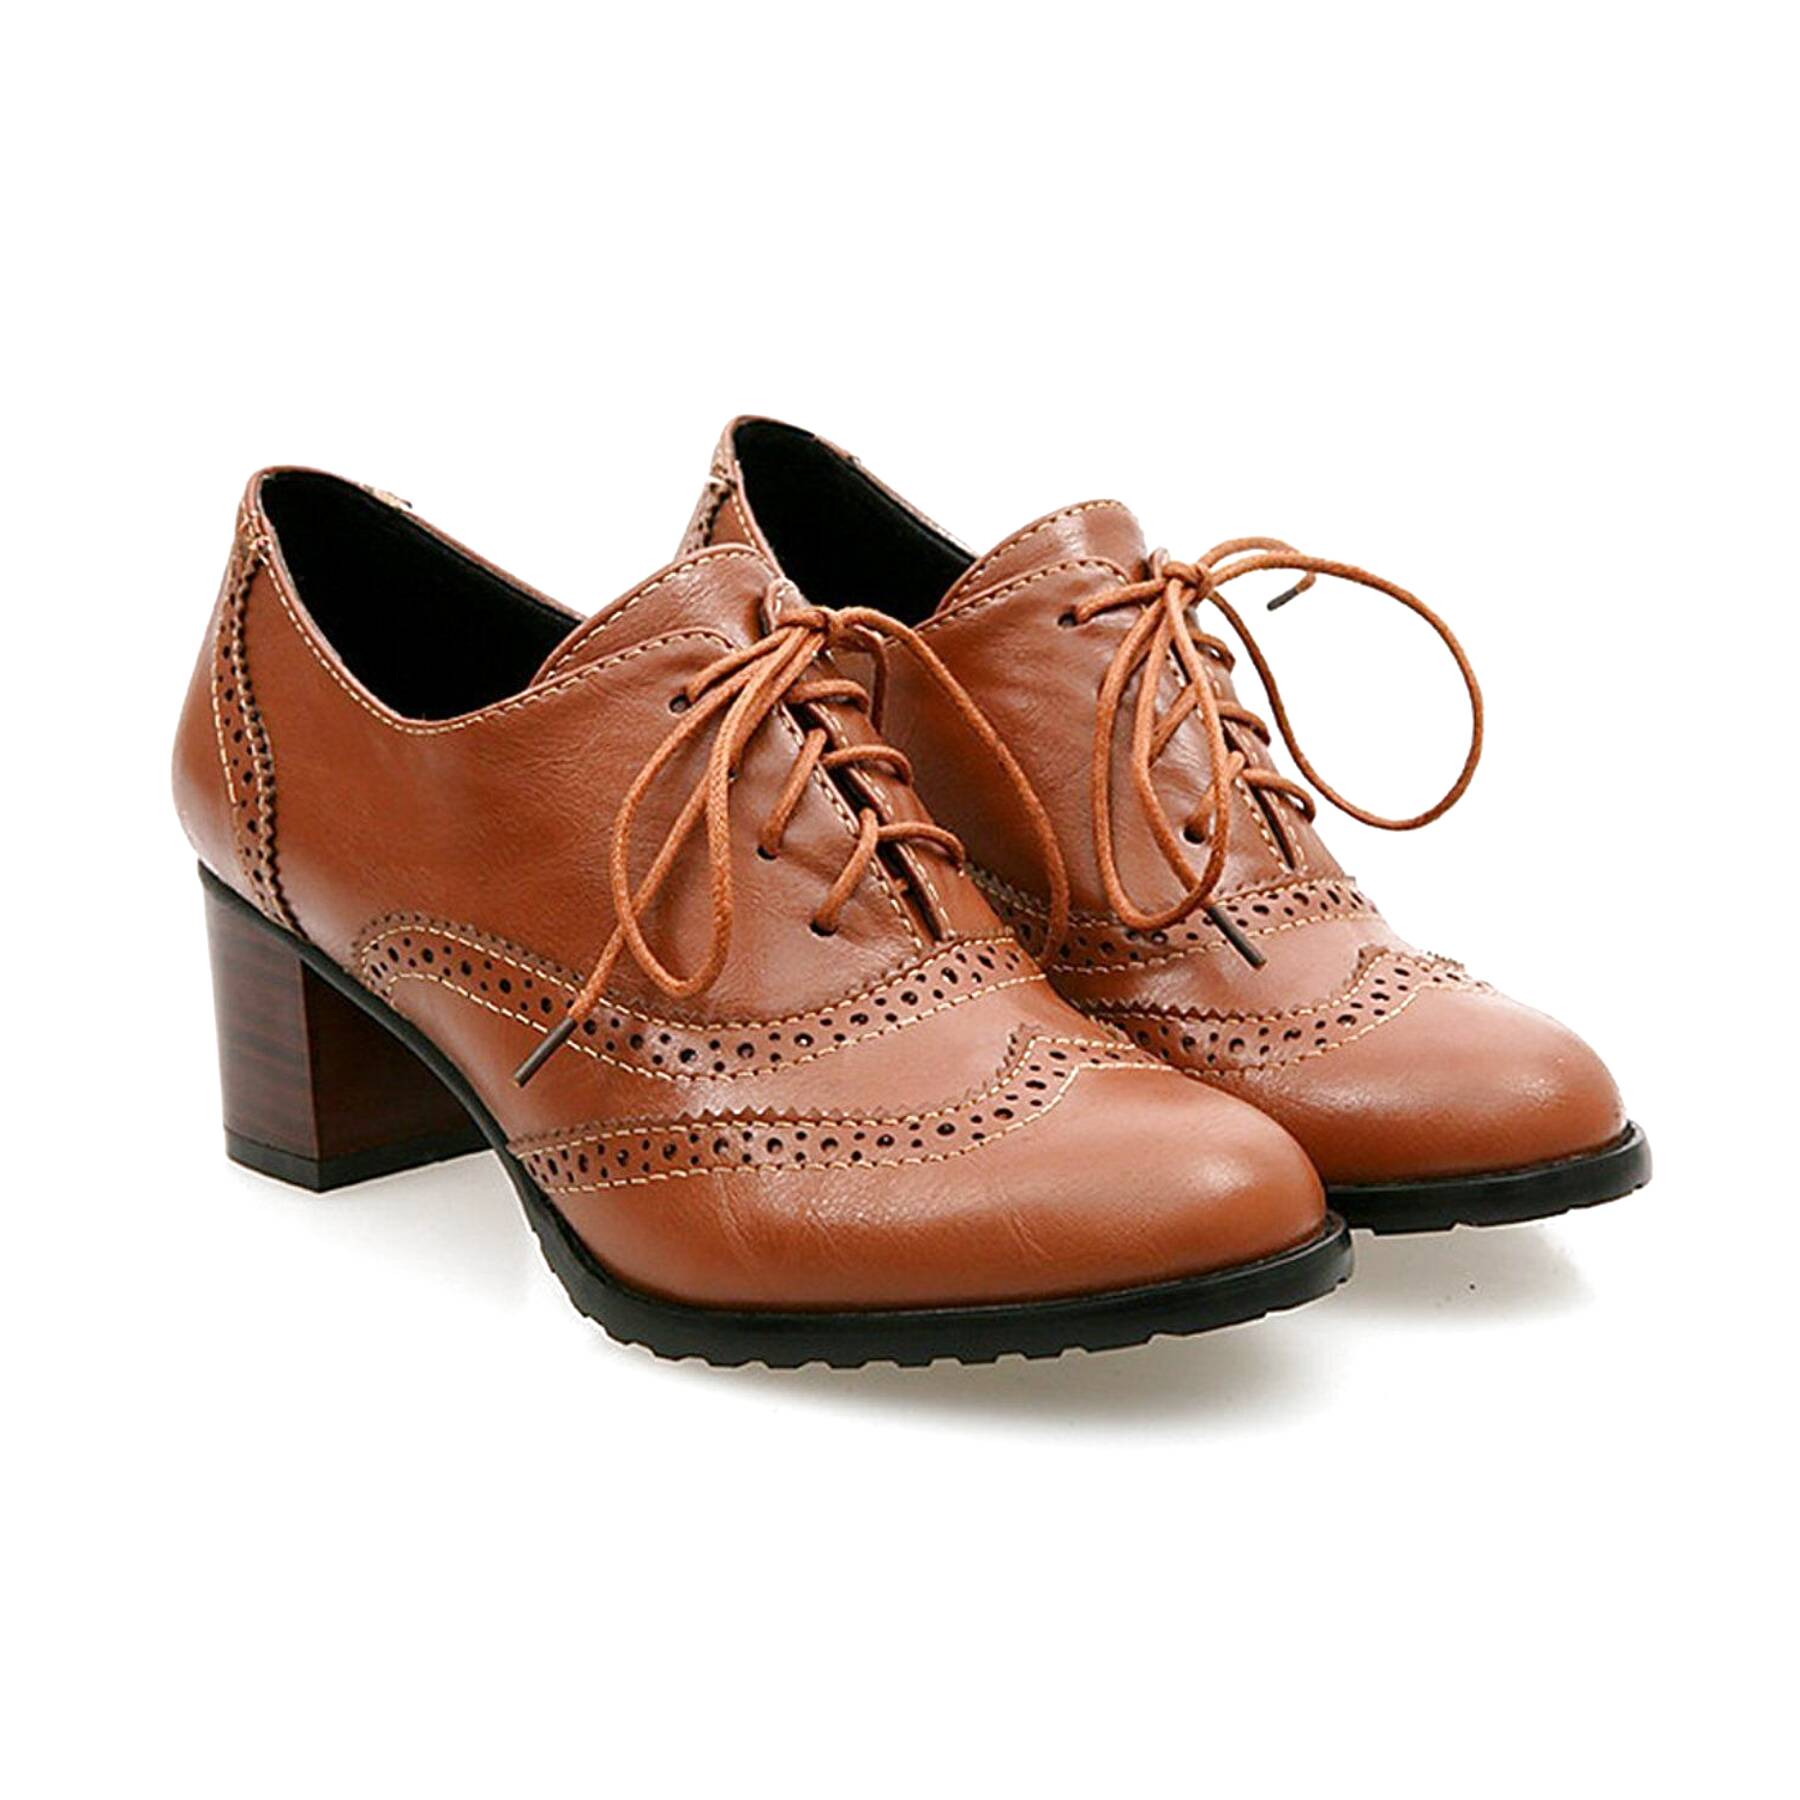 Vintage Brogue Shoes for sale in UK | 60 used Vintage Brogue Shoes